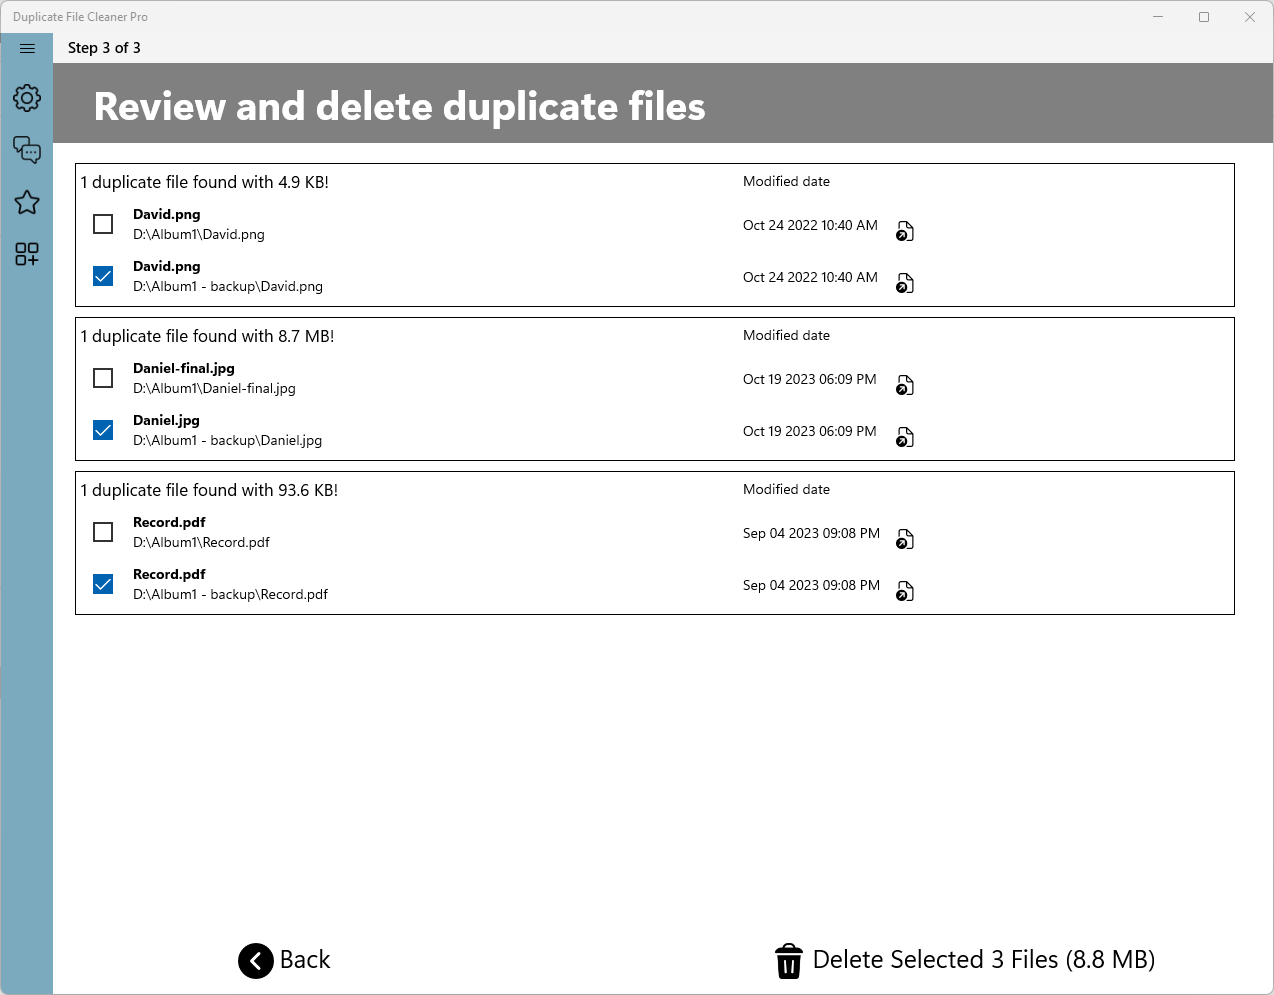 View duplicate files and select which files to delete